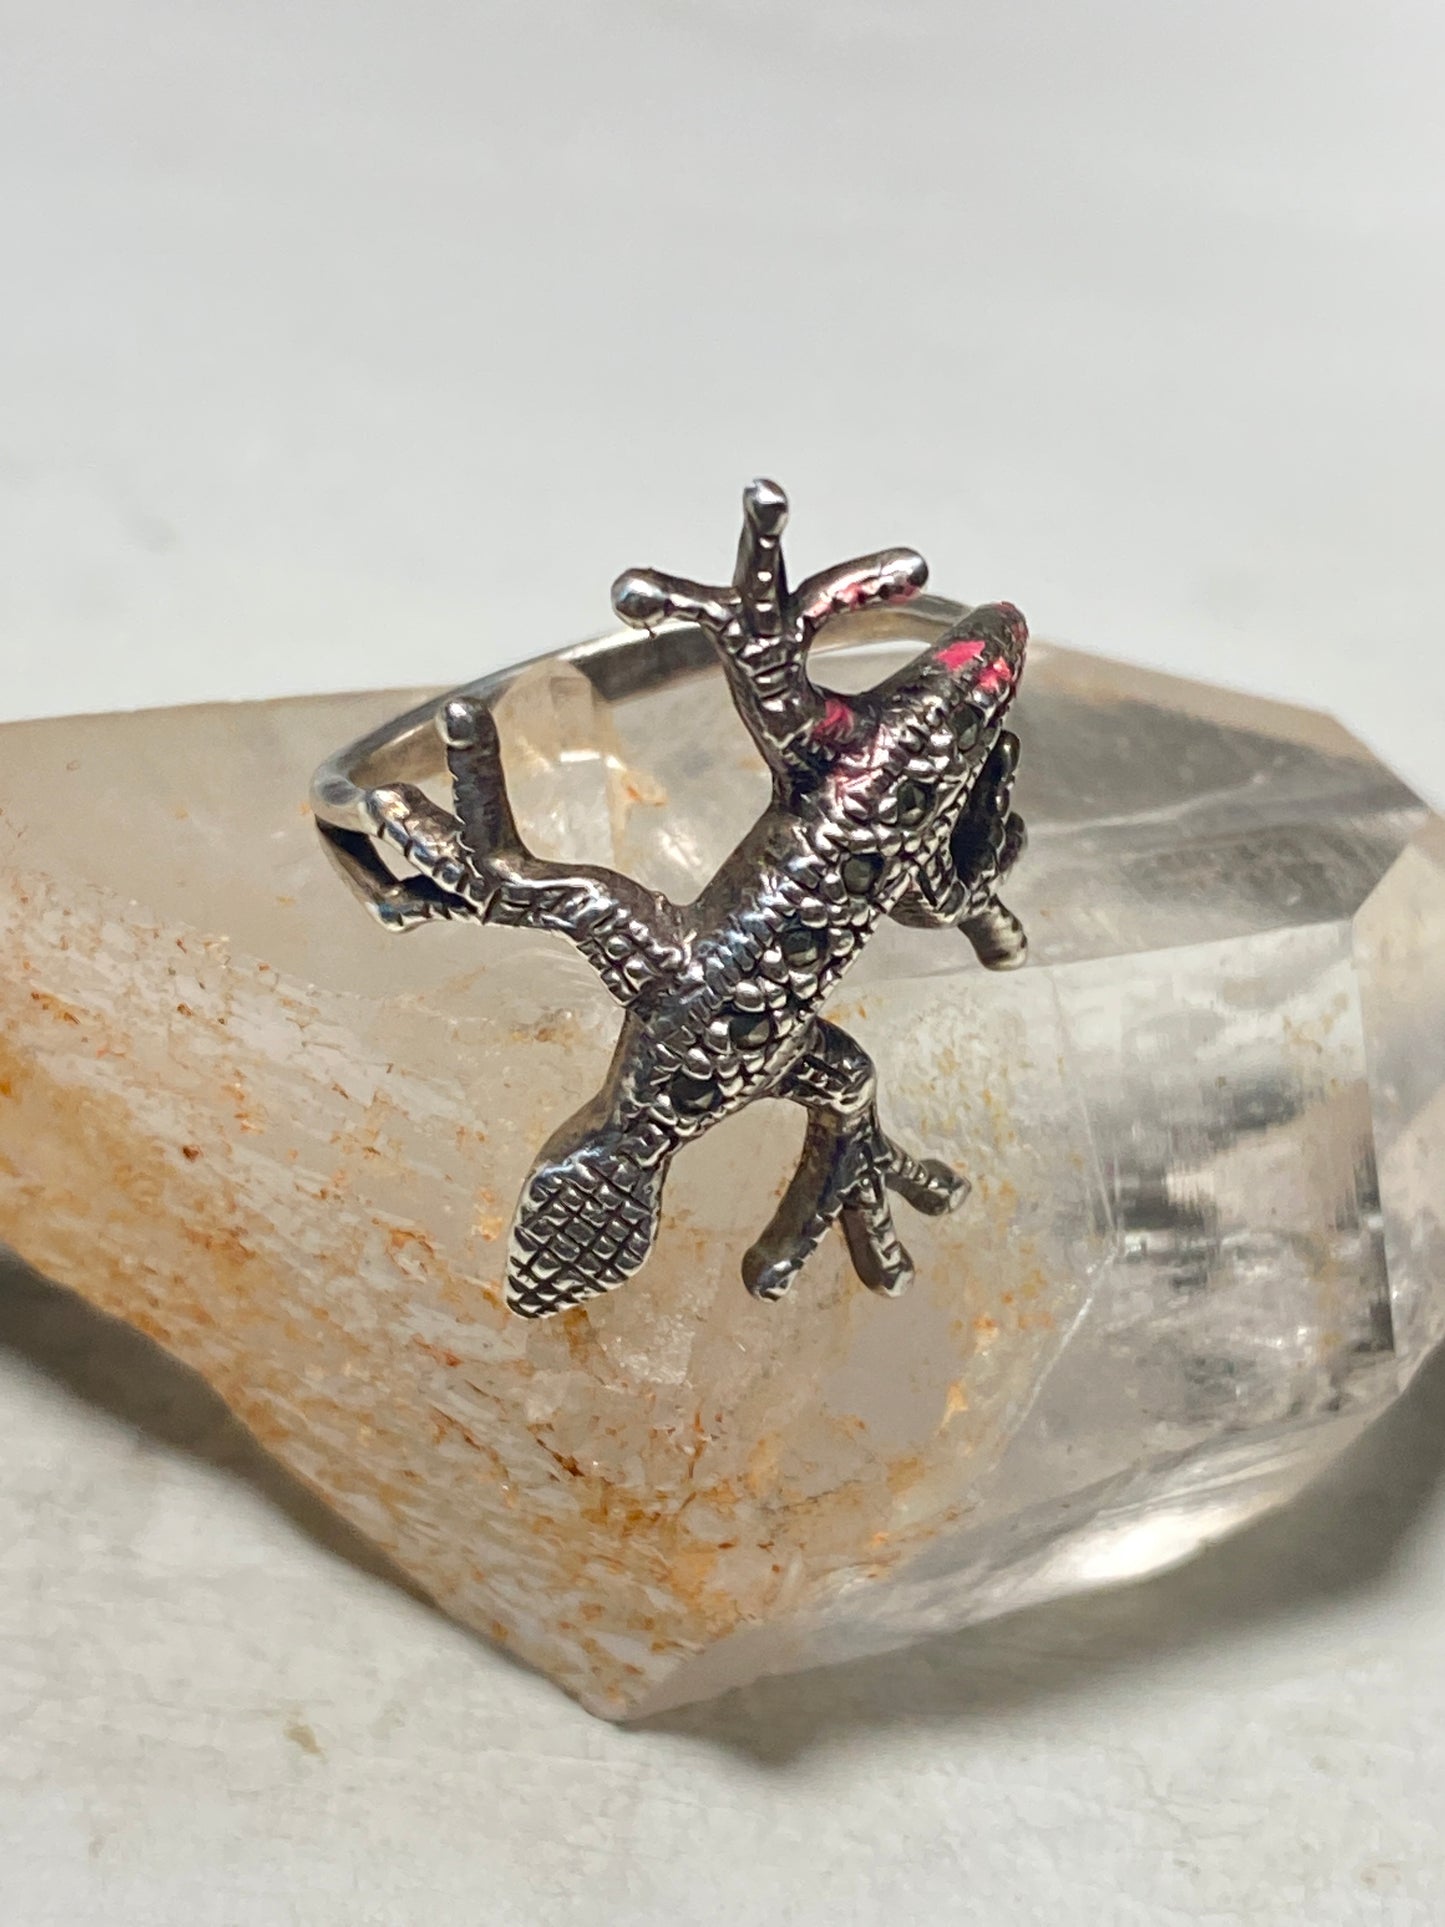 Lizard ring marcasites band sterling silver women girls